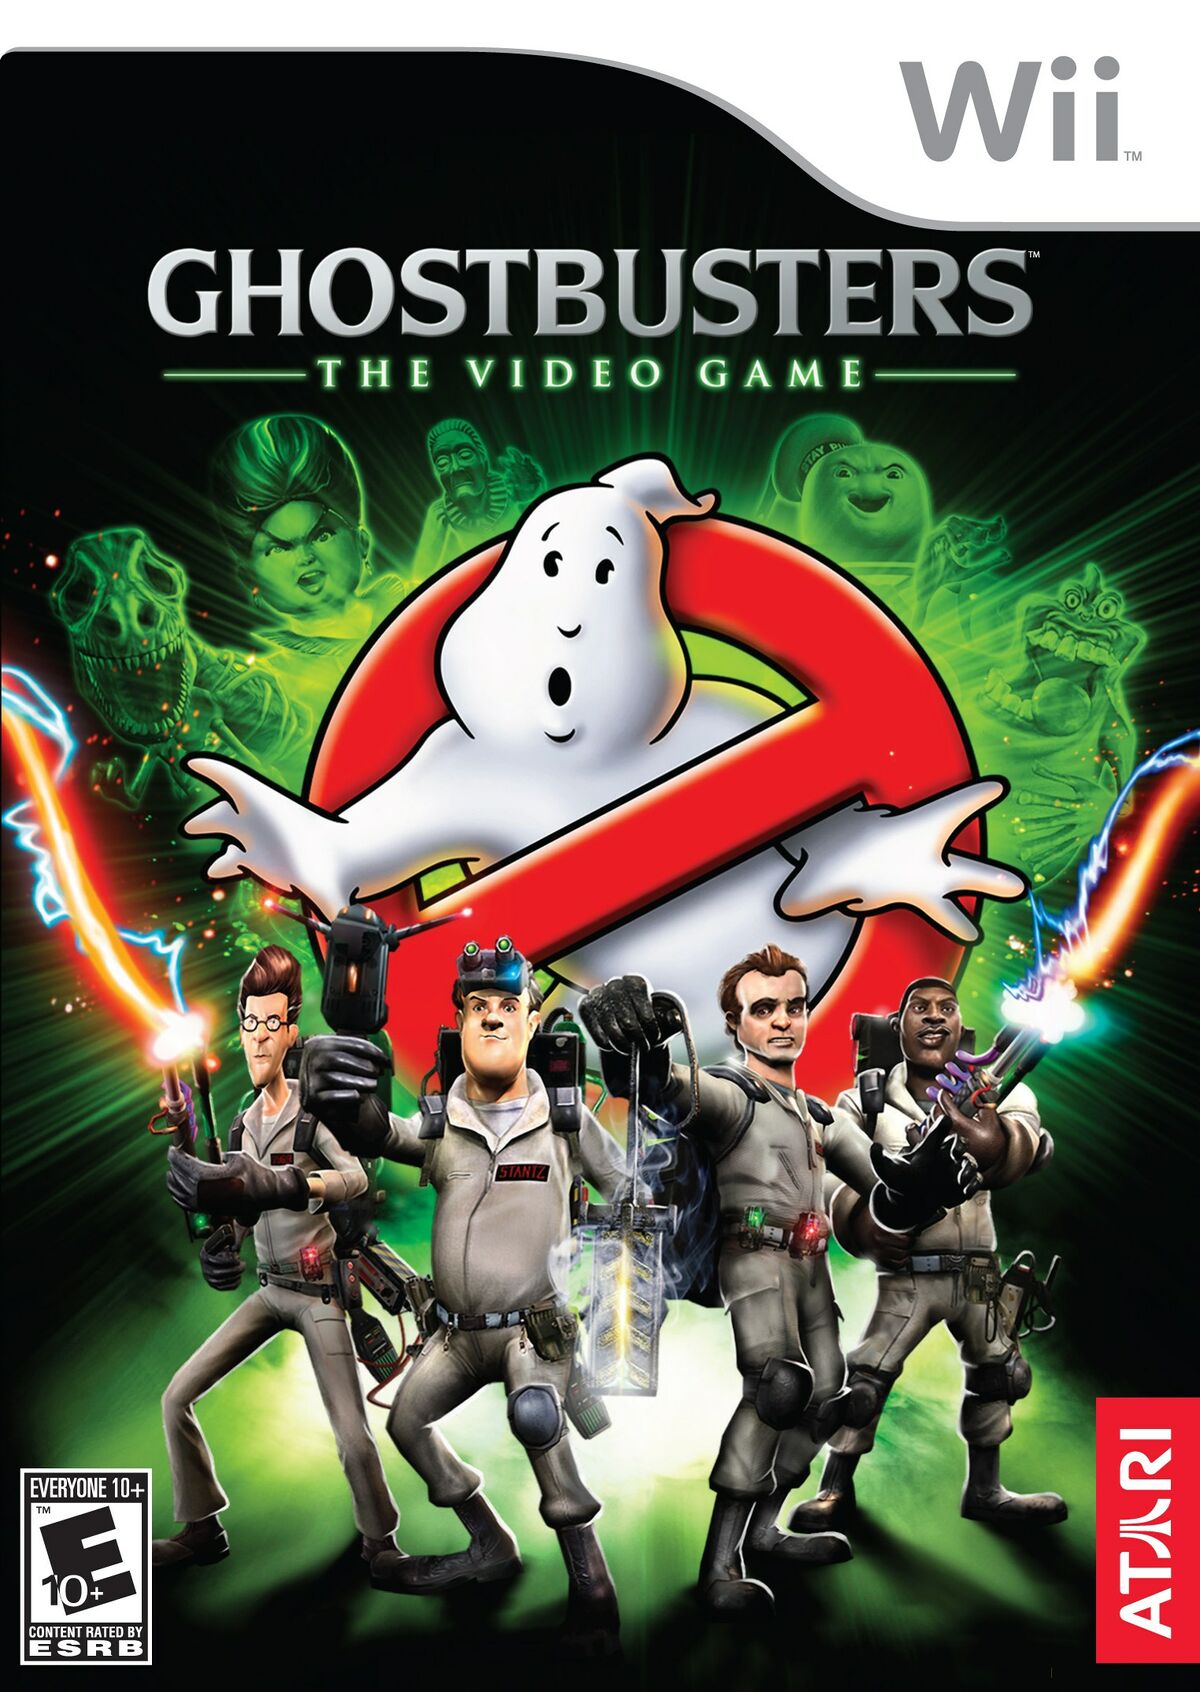 Ghostbusters: The Video Game - Wikipedia